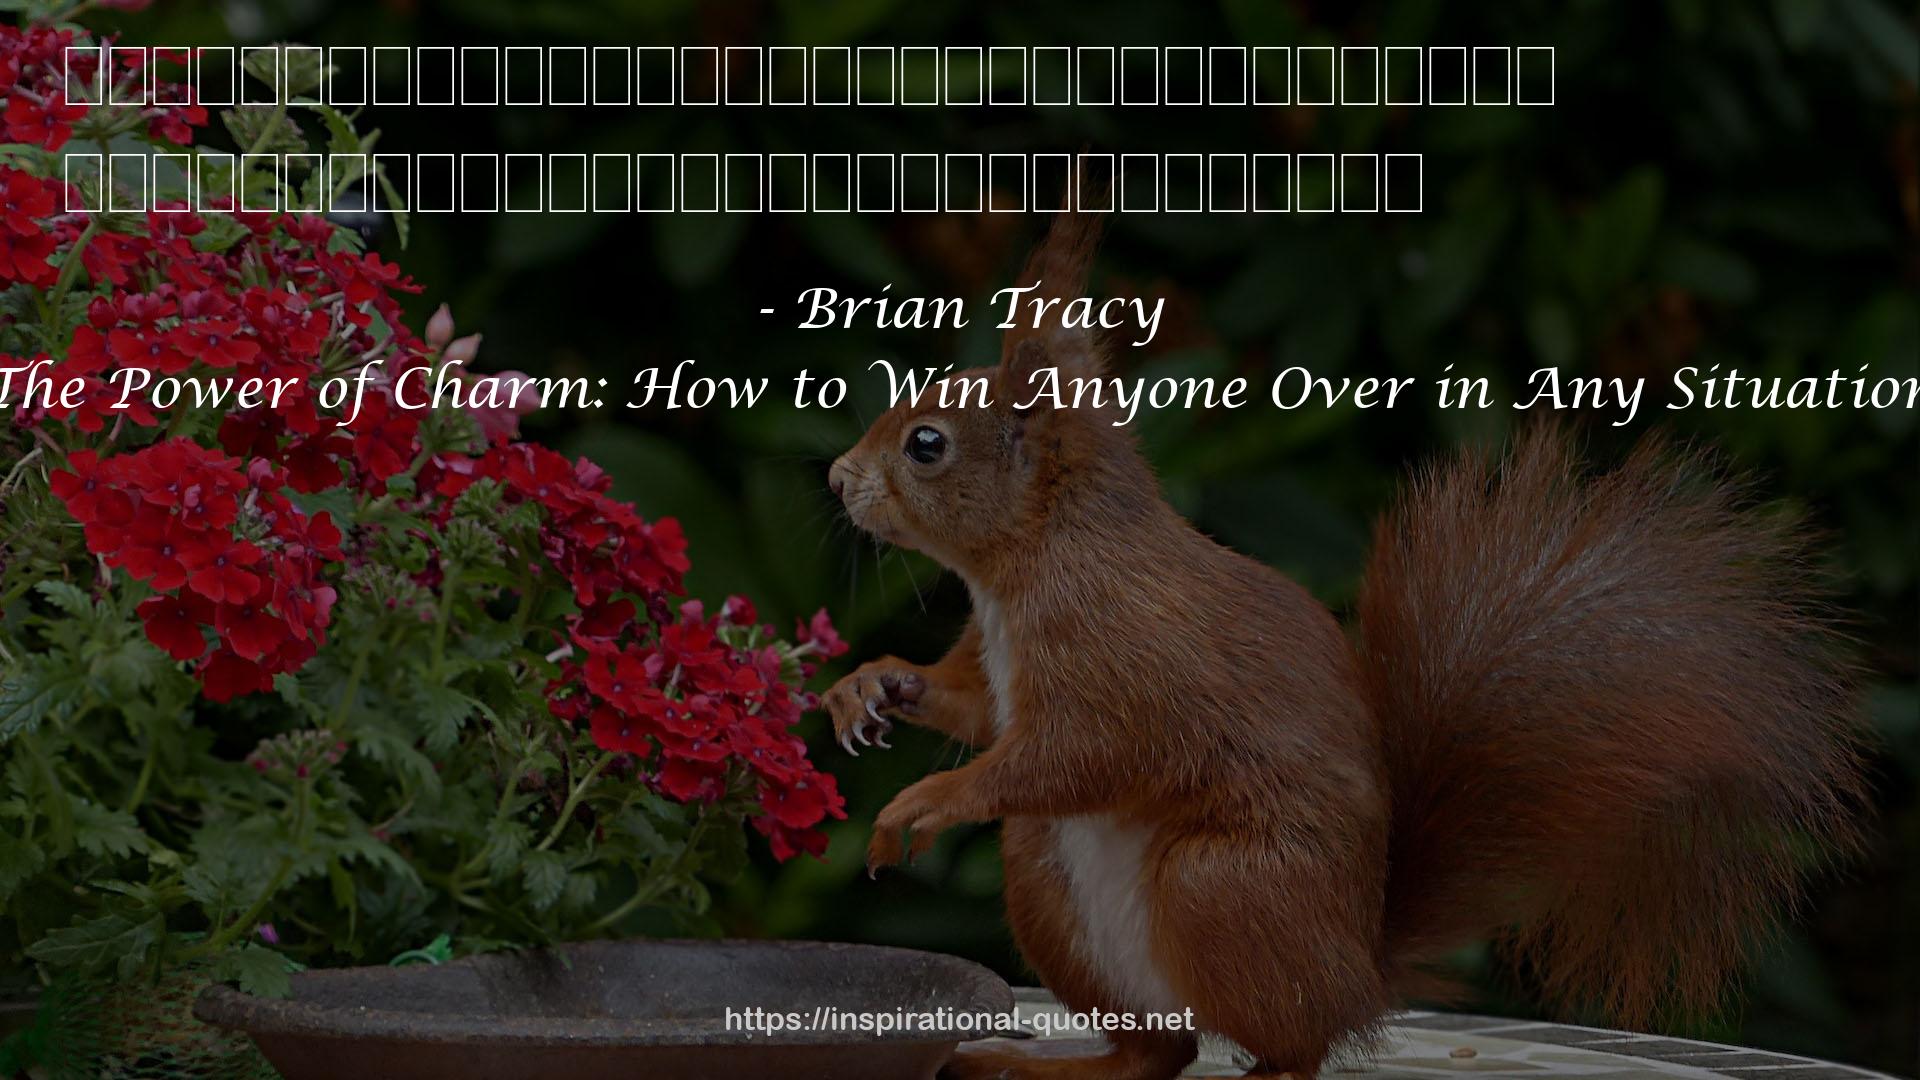 The Power of Charm: How to Win Anyone Over in Any Situation QUOTES